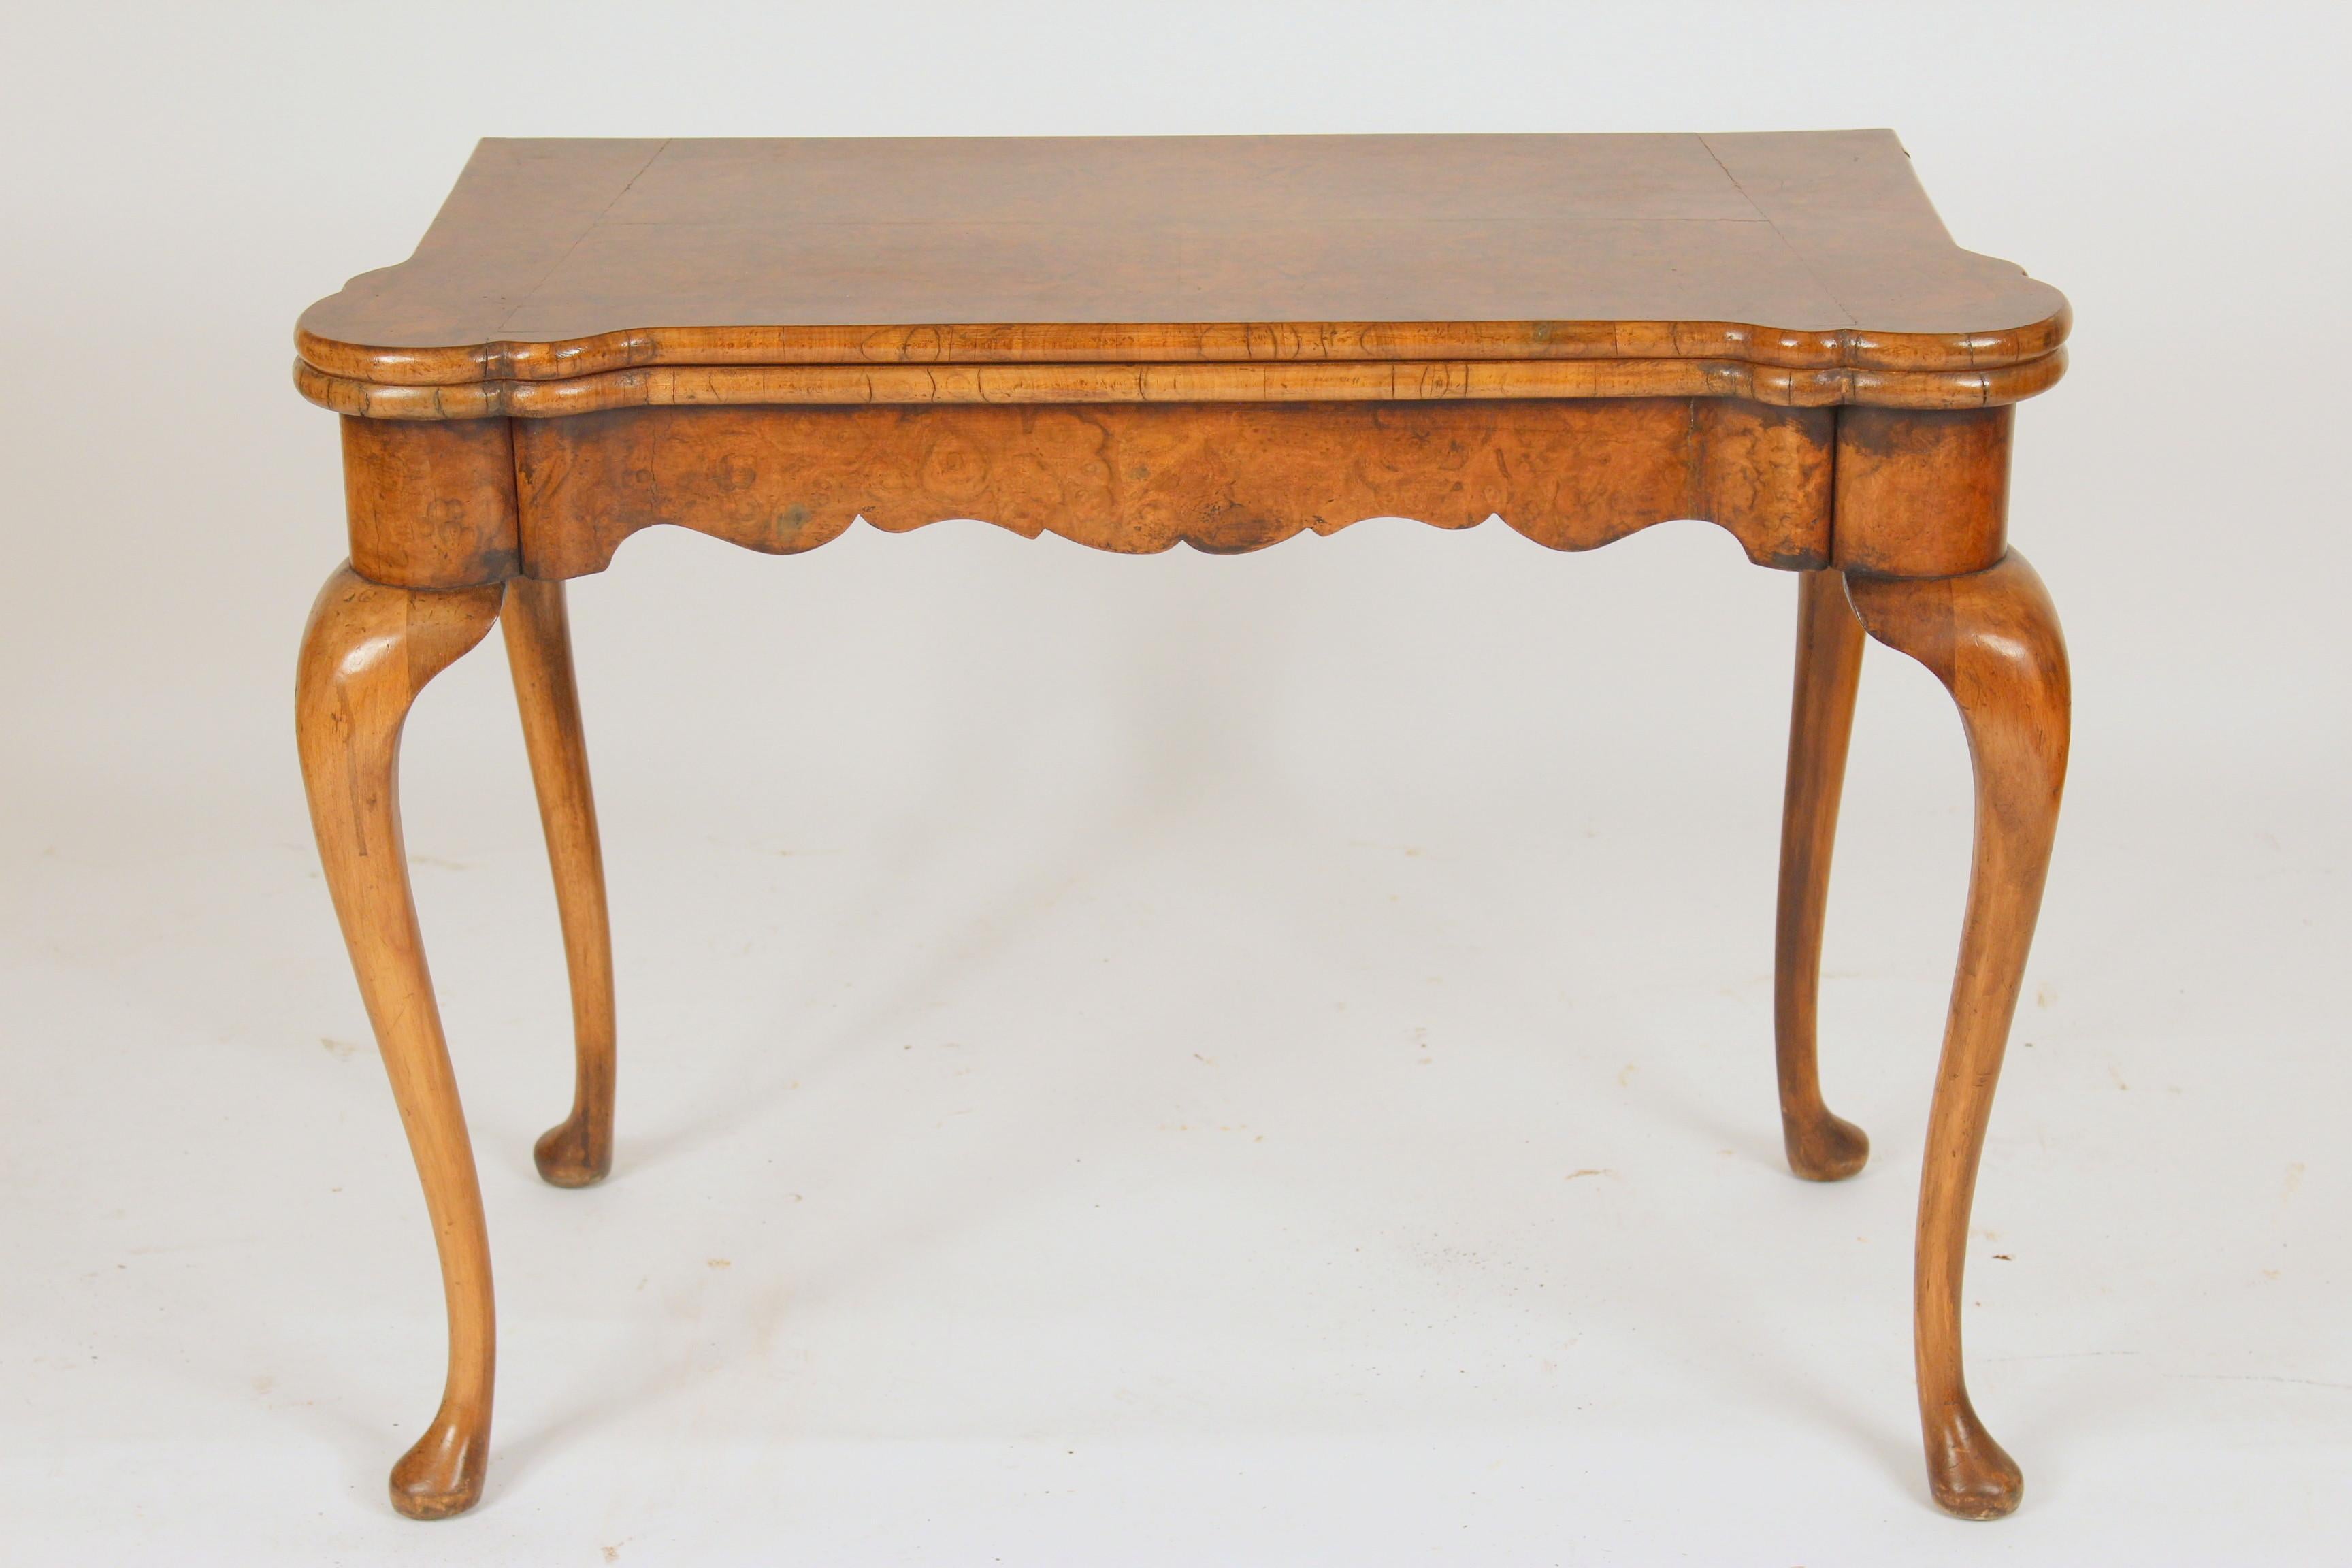 George I style burl elm and walnut ? Concertina action games table with a suede playing surface, turret corners and wells for gaming chips, circa 1920-1940. Dimensions when gaming surface is opened 40.75